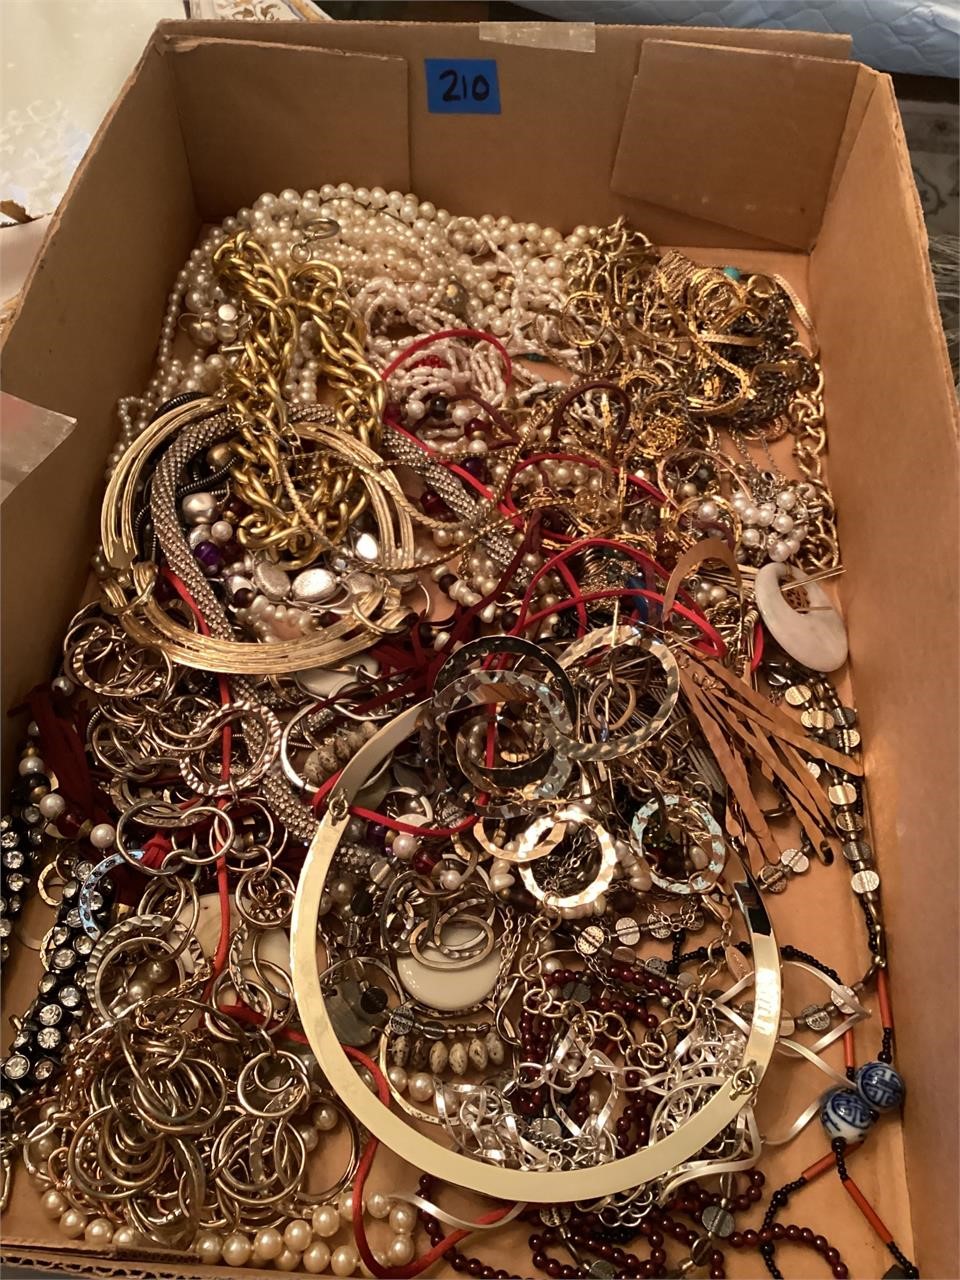 LARGE flat of jewelry, basically unsearched